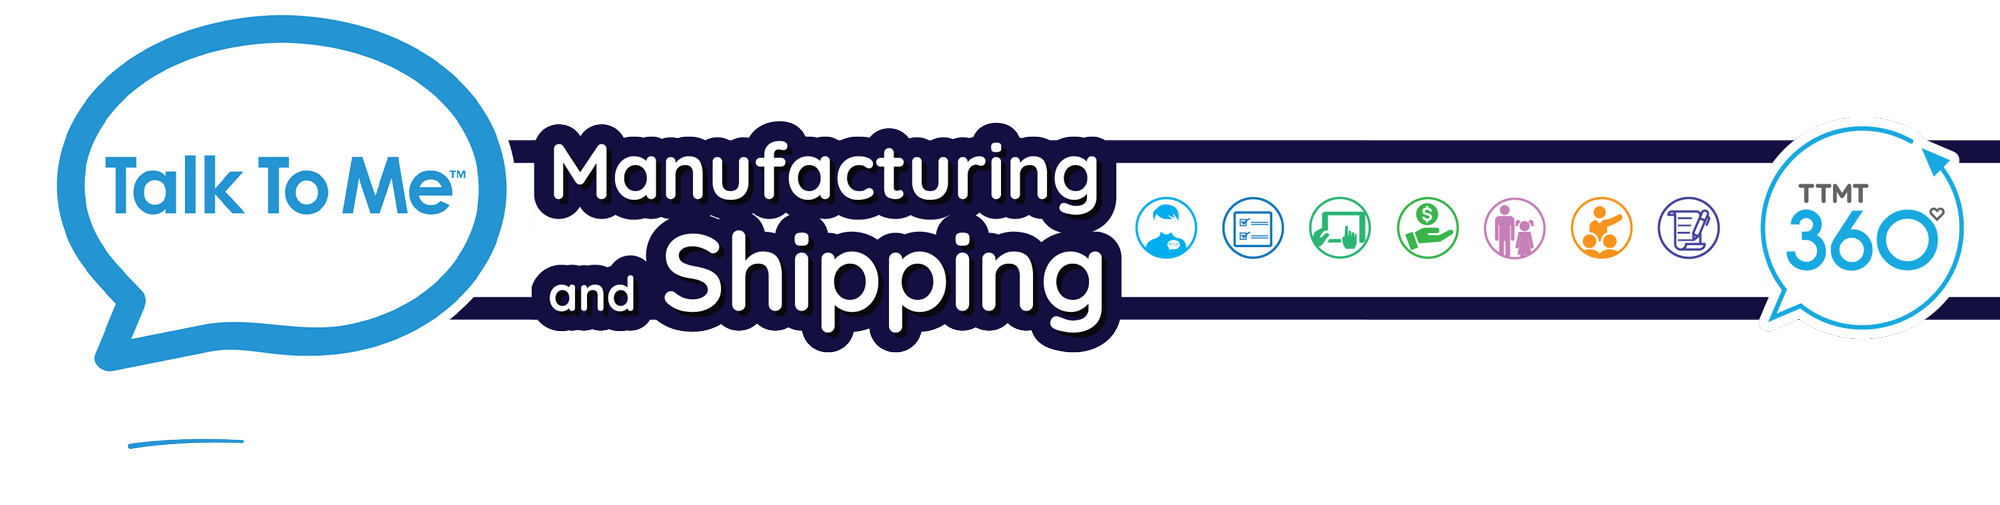 Manufacturing and Shipping header